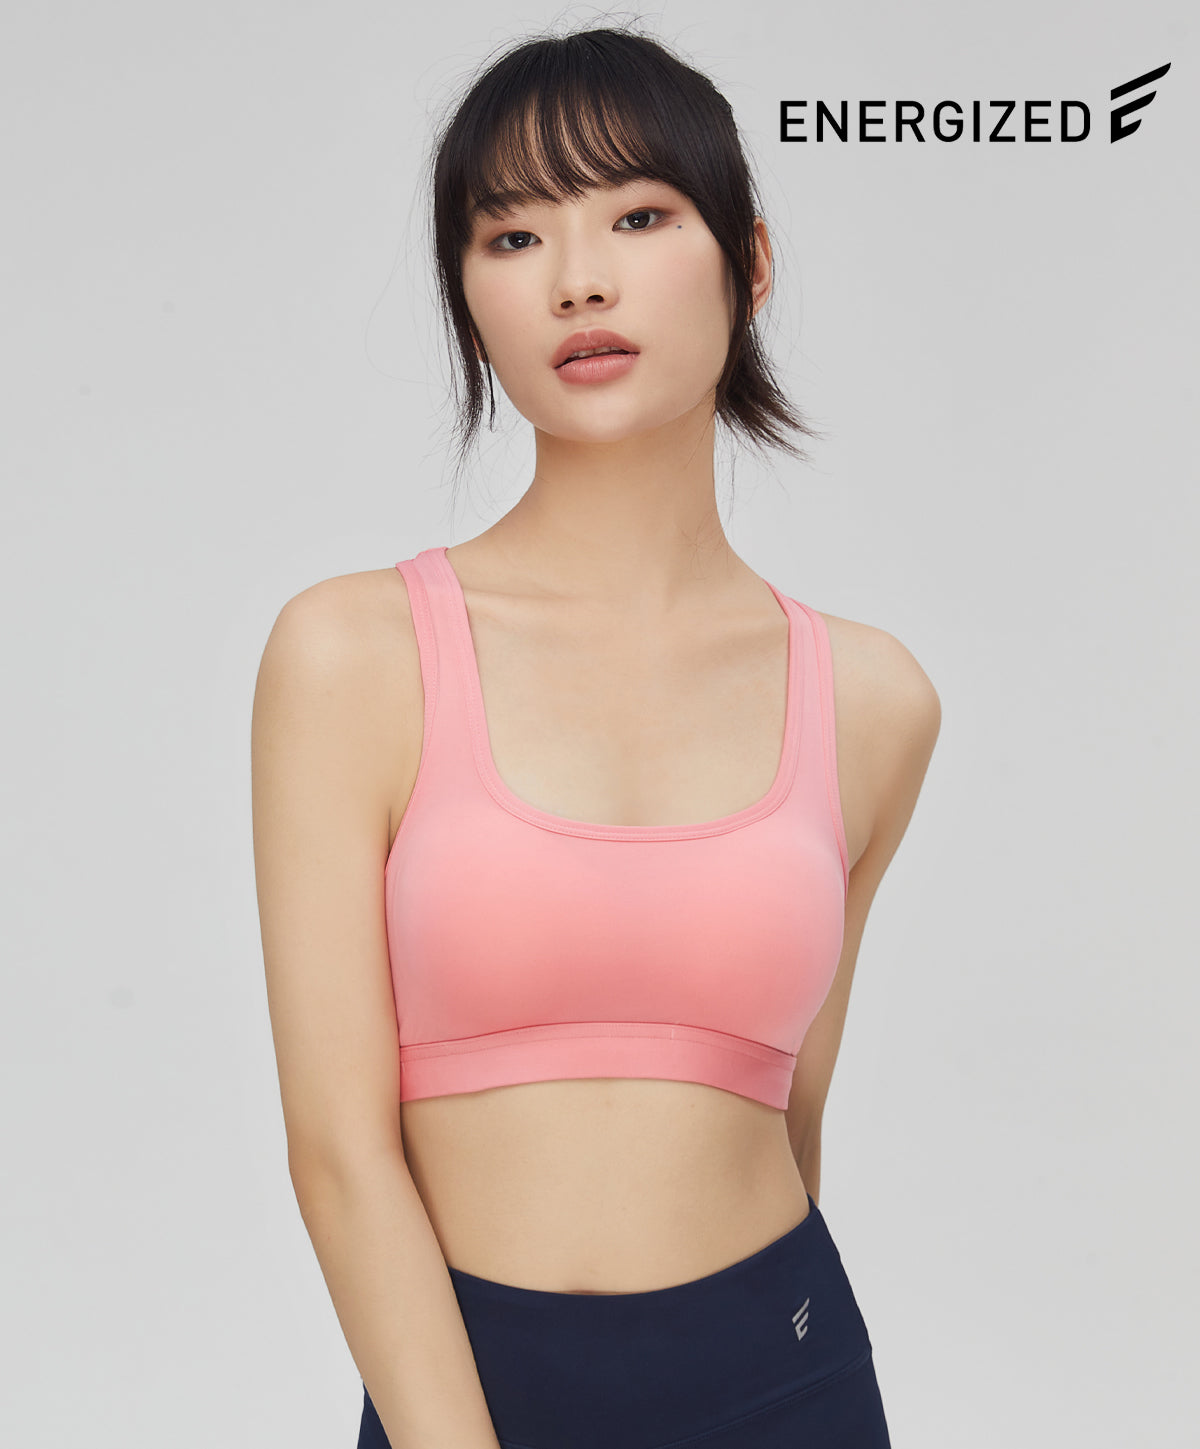 Sunway Velocity Mall - Energized Sports Bra at RM1??! YES no doubt